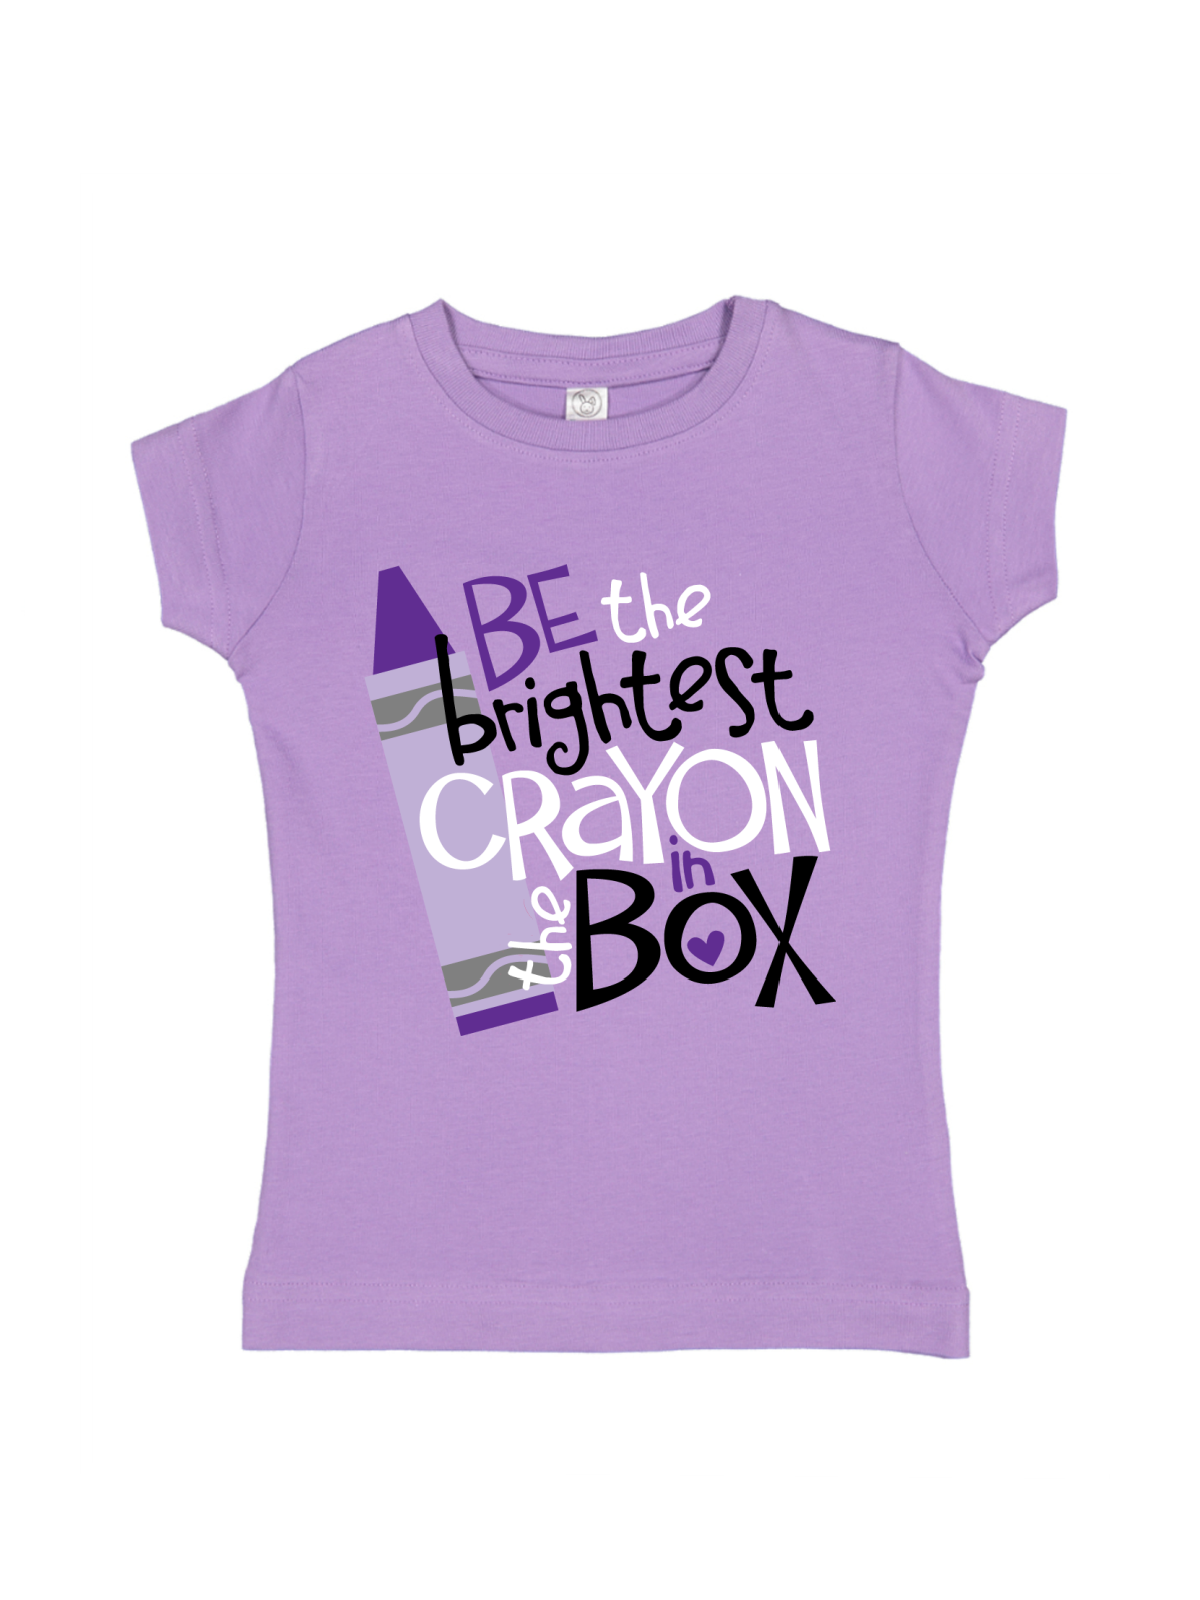 Be the Brightest Crayon in the Box Girls Shirt in Lavender